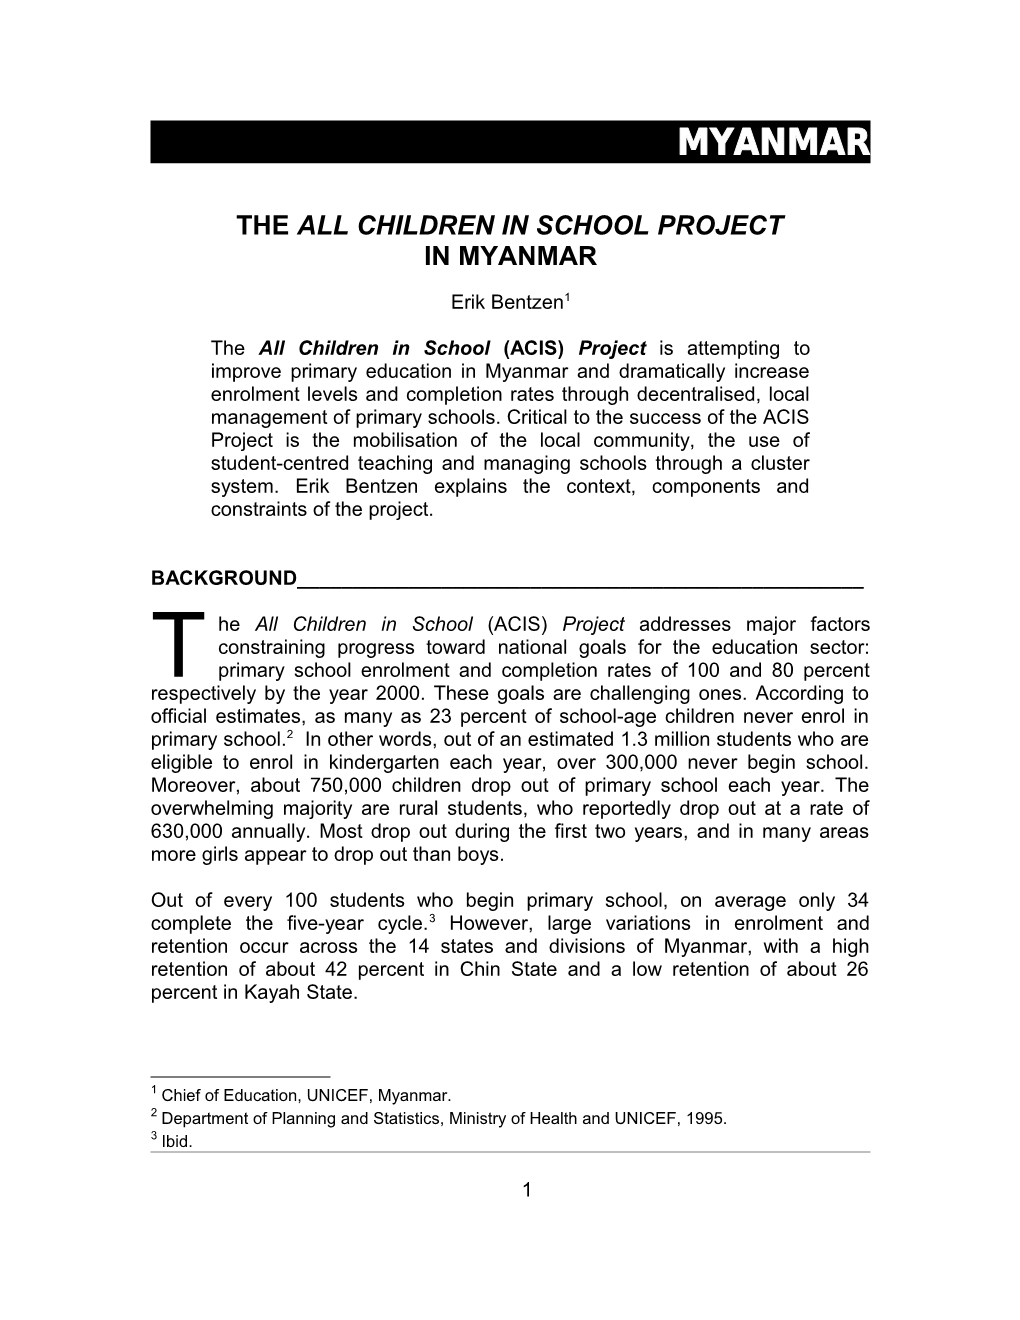 The All Children In School Project